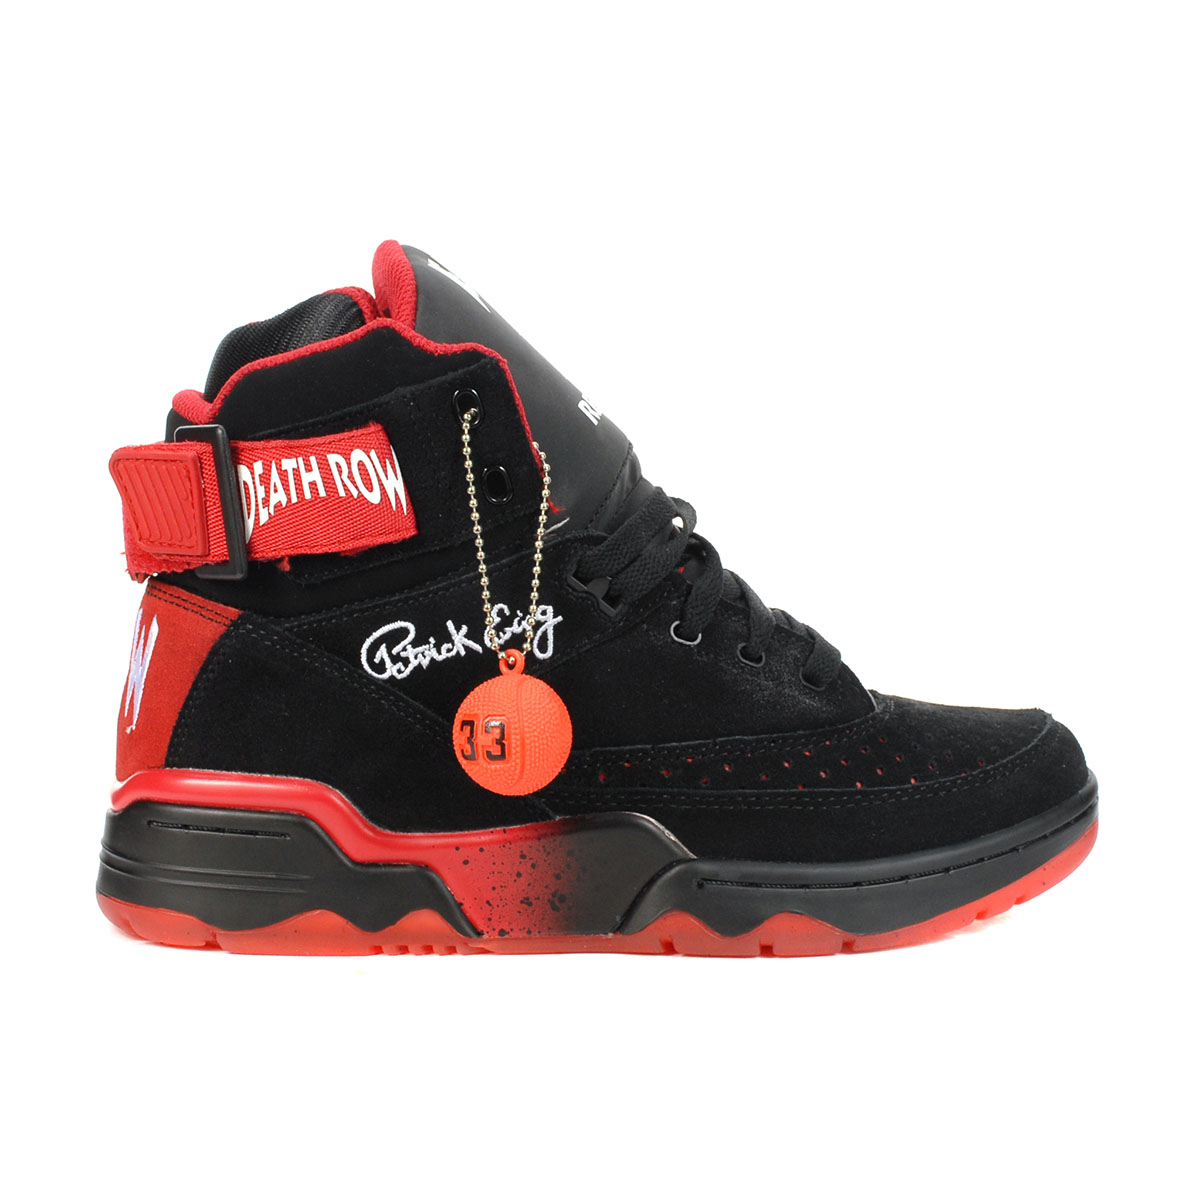 Patrick Ewing 33 HI x Death Row Records Black/Red Basketball Shoes